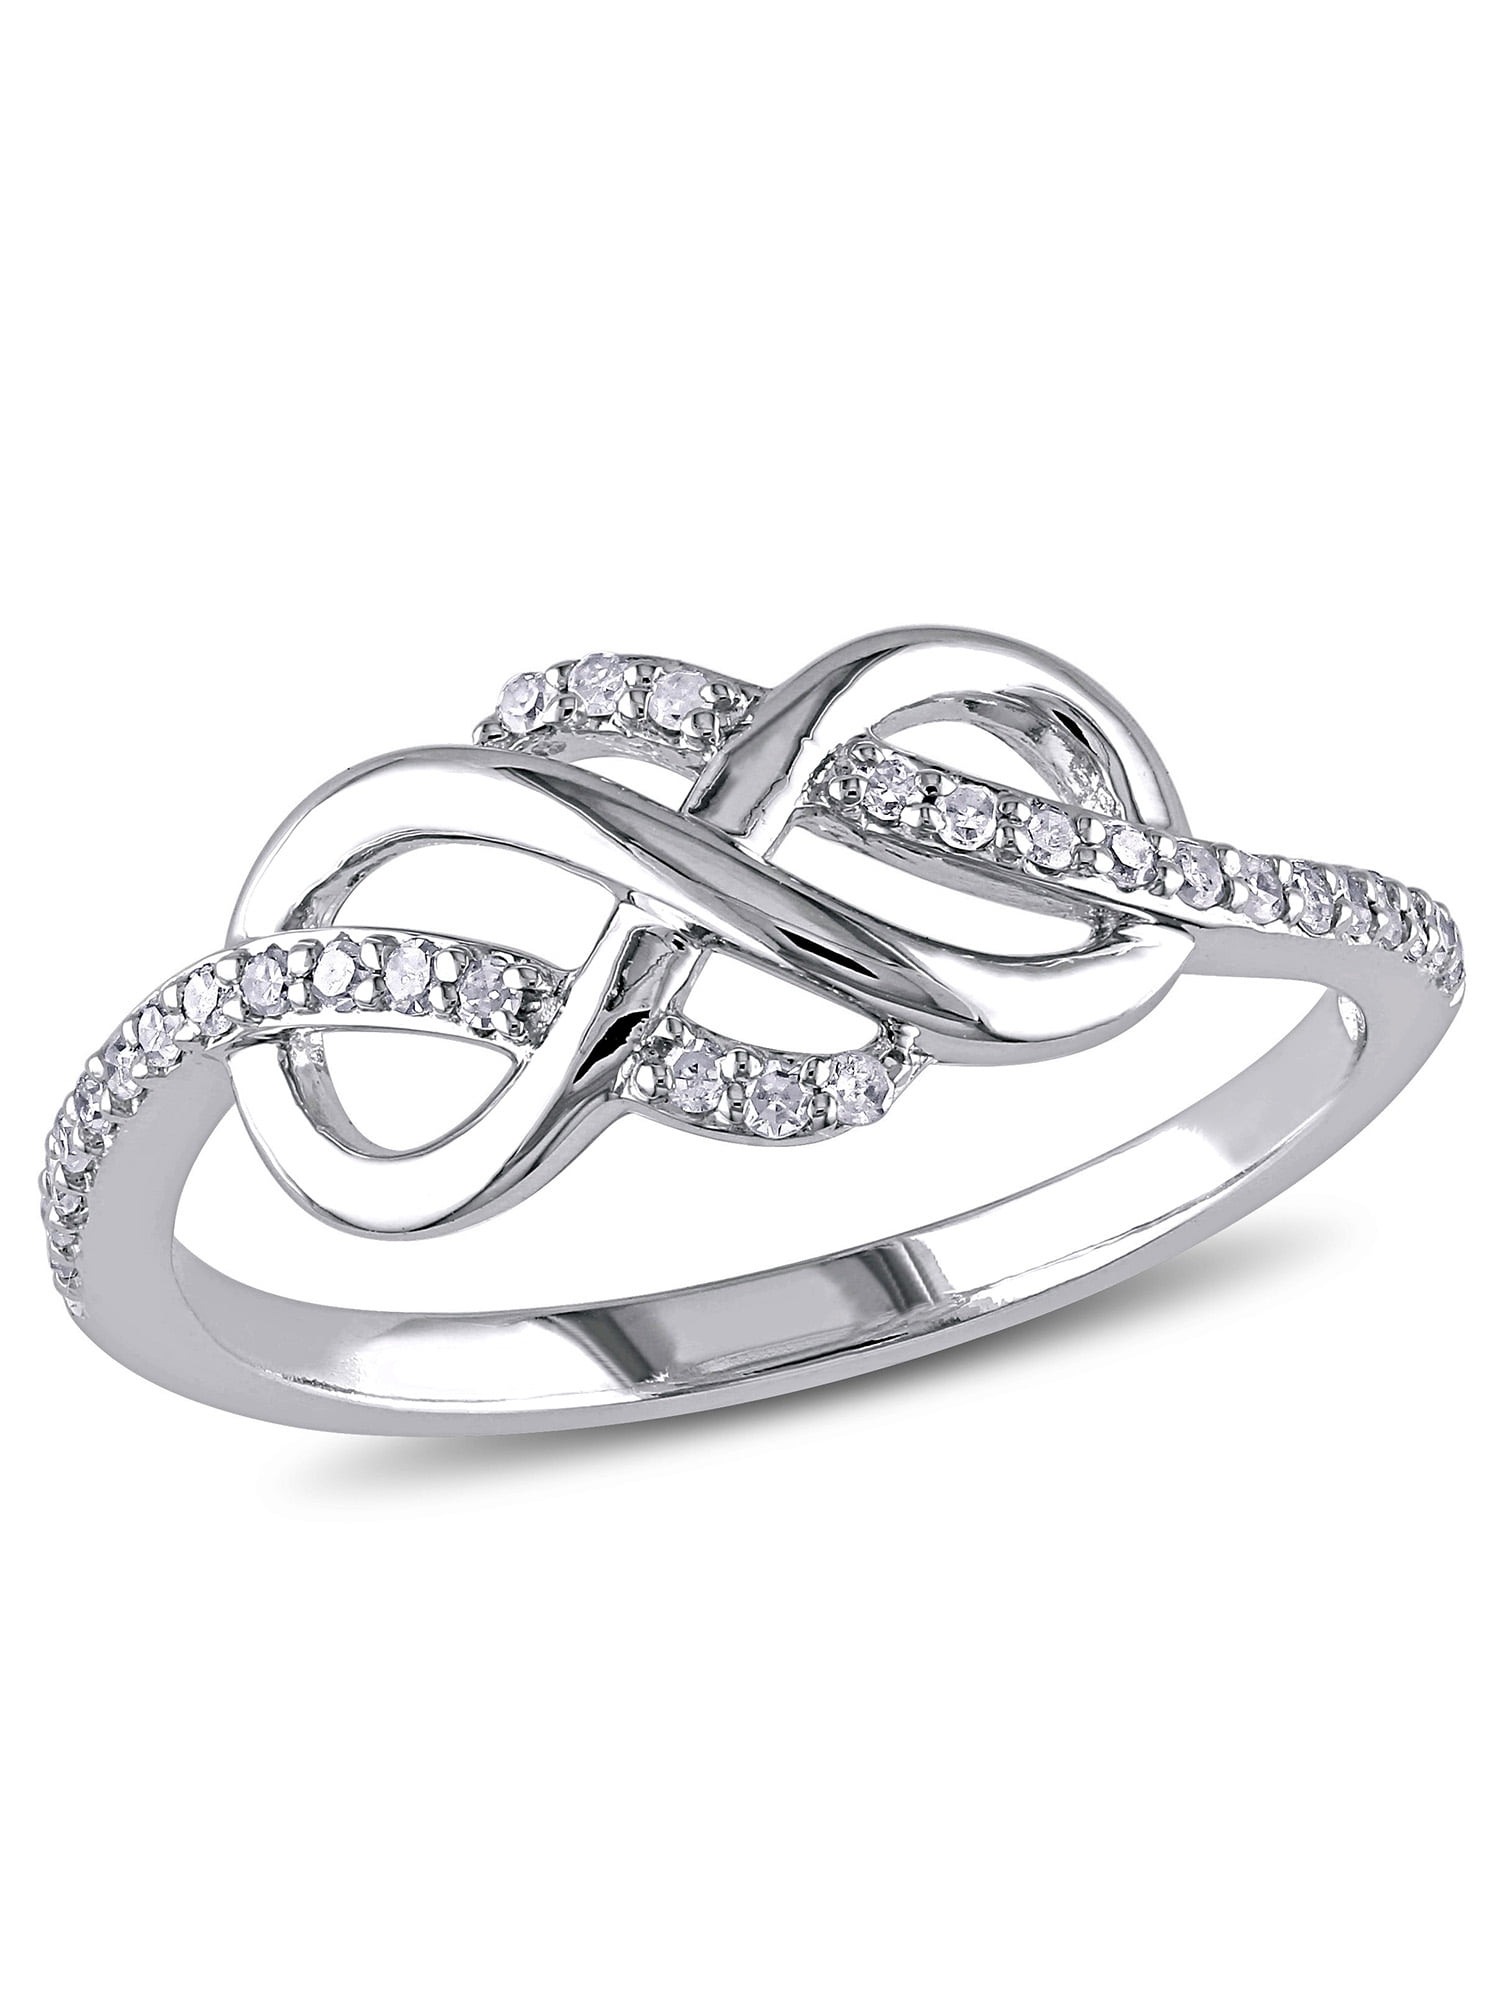 1/7 Carat T.W. Diamond 10kt White Gold Infinity Crossover Ring ...